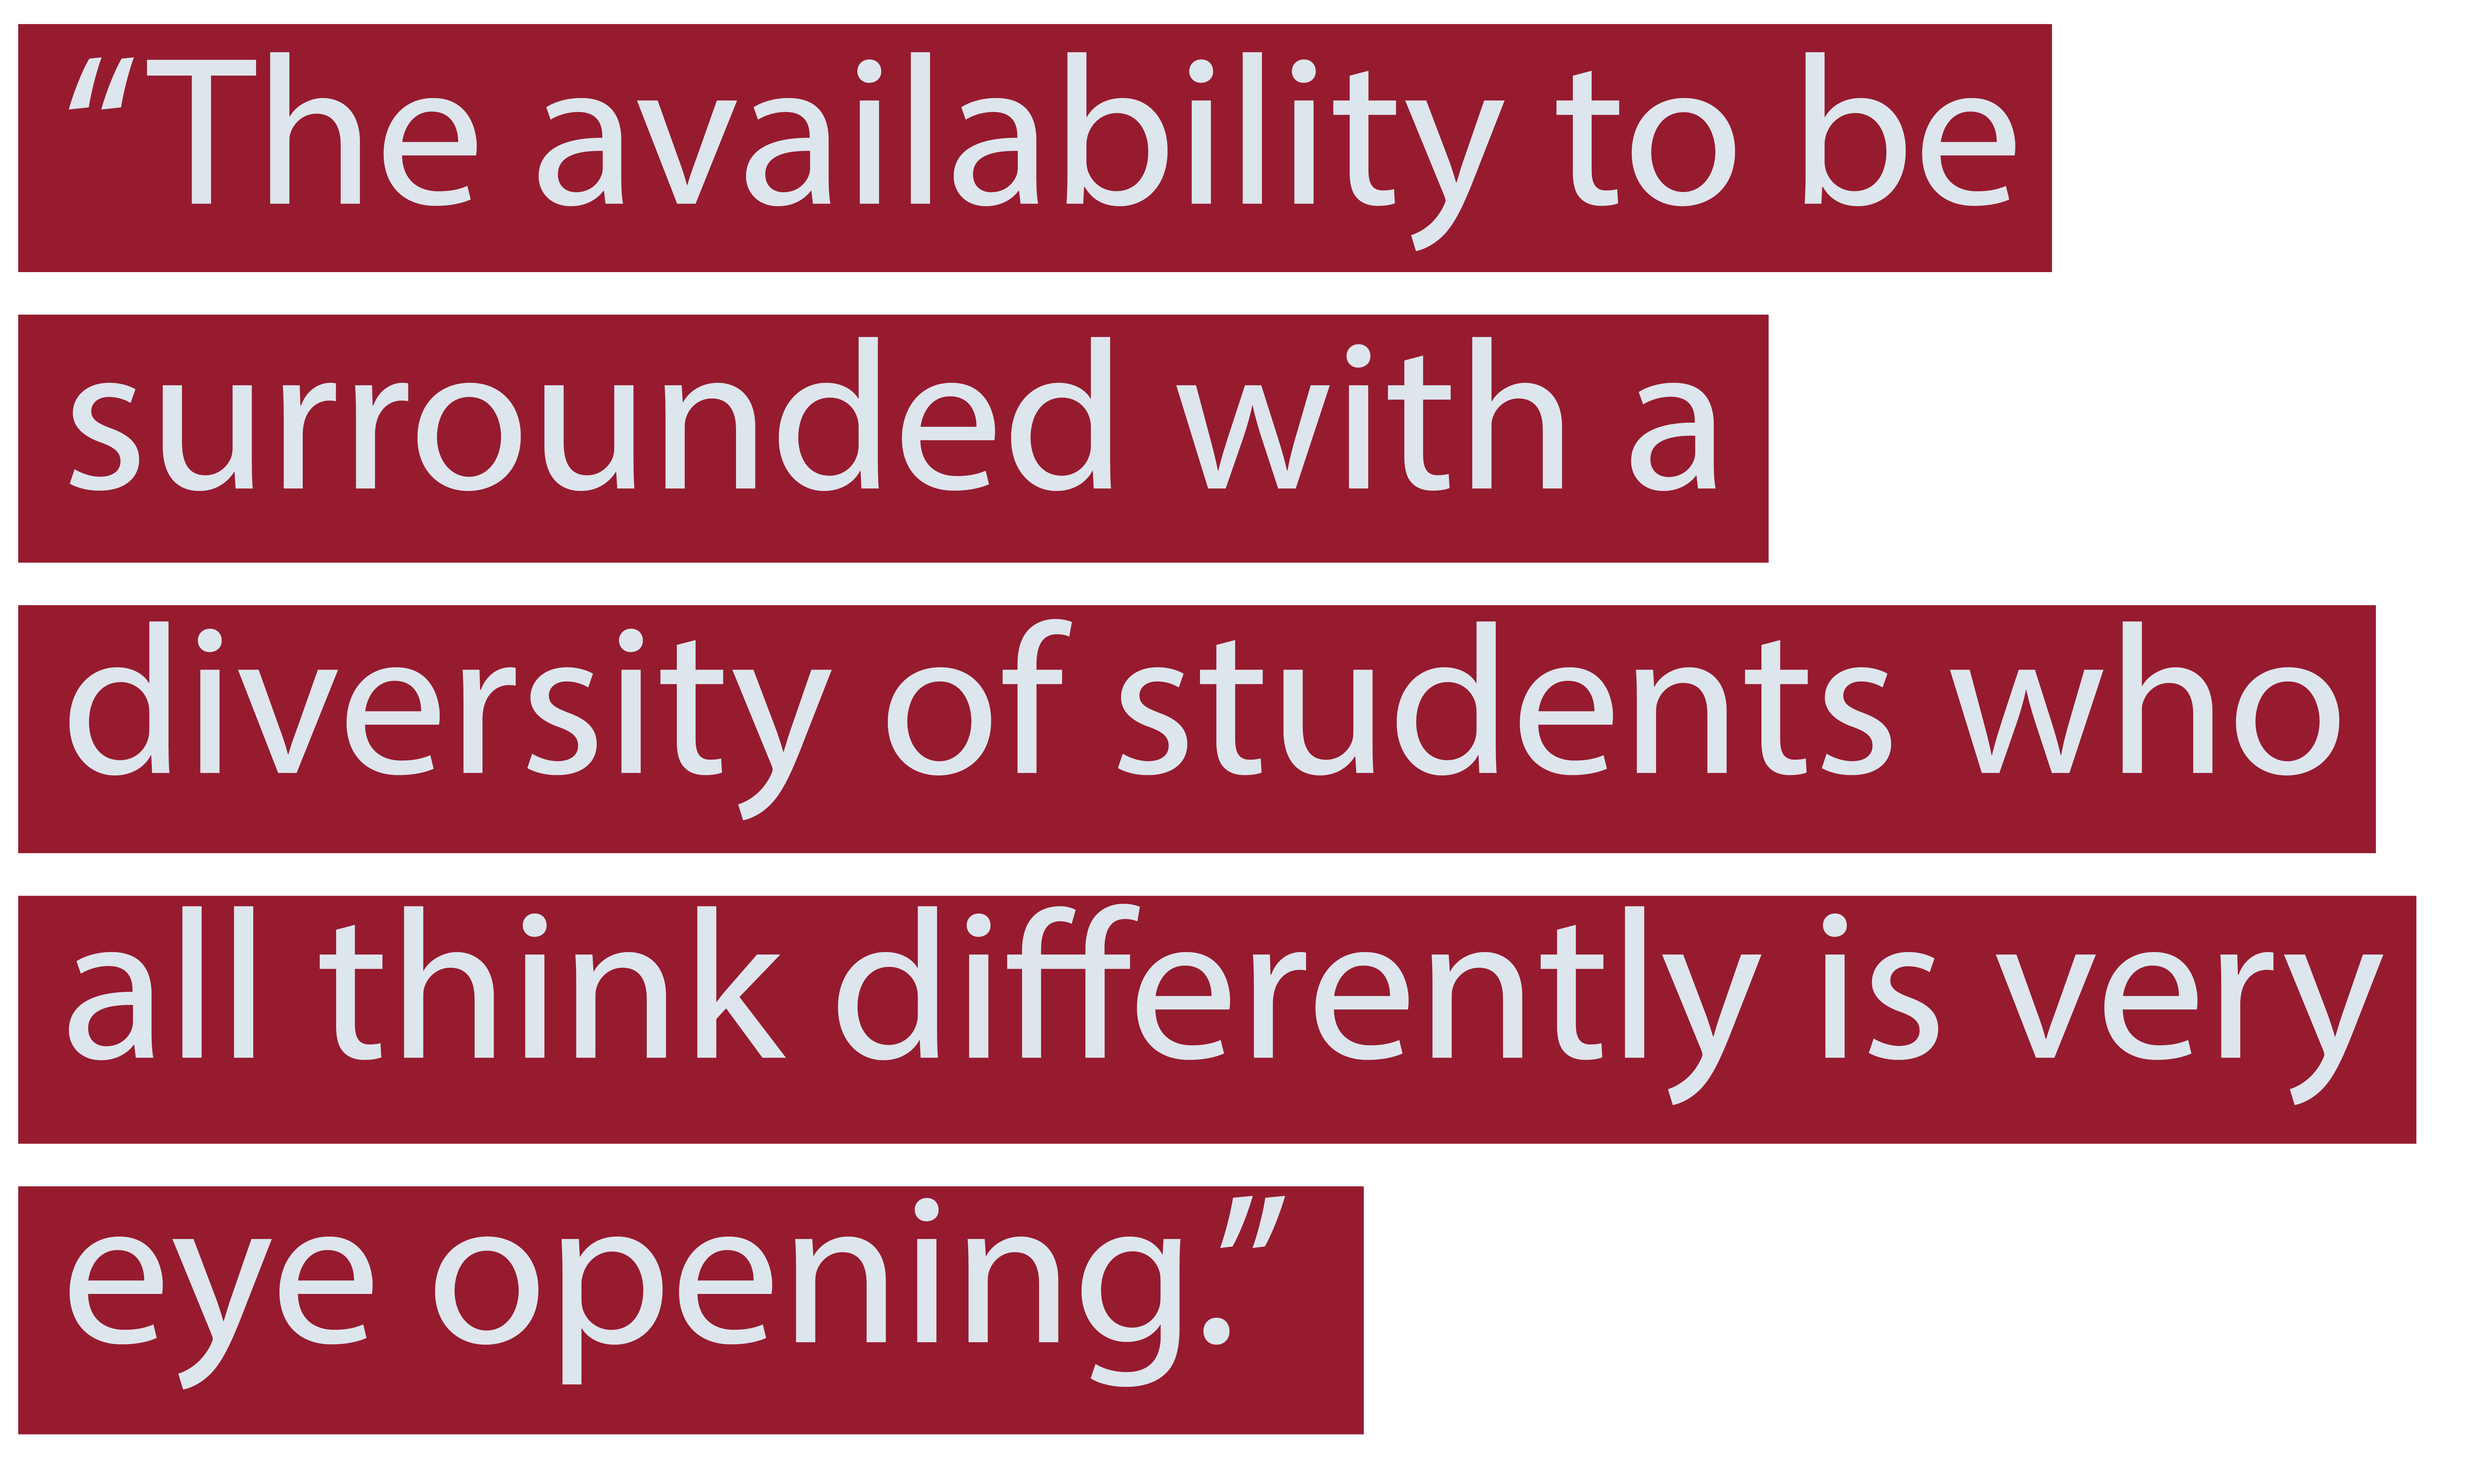 "The availability to be surrounded with a diversity of students who all think differently is very eye opening."